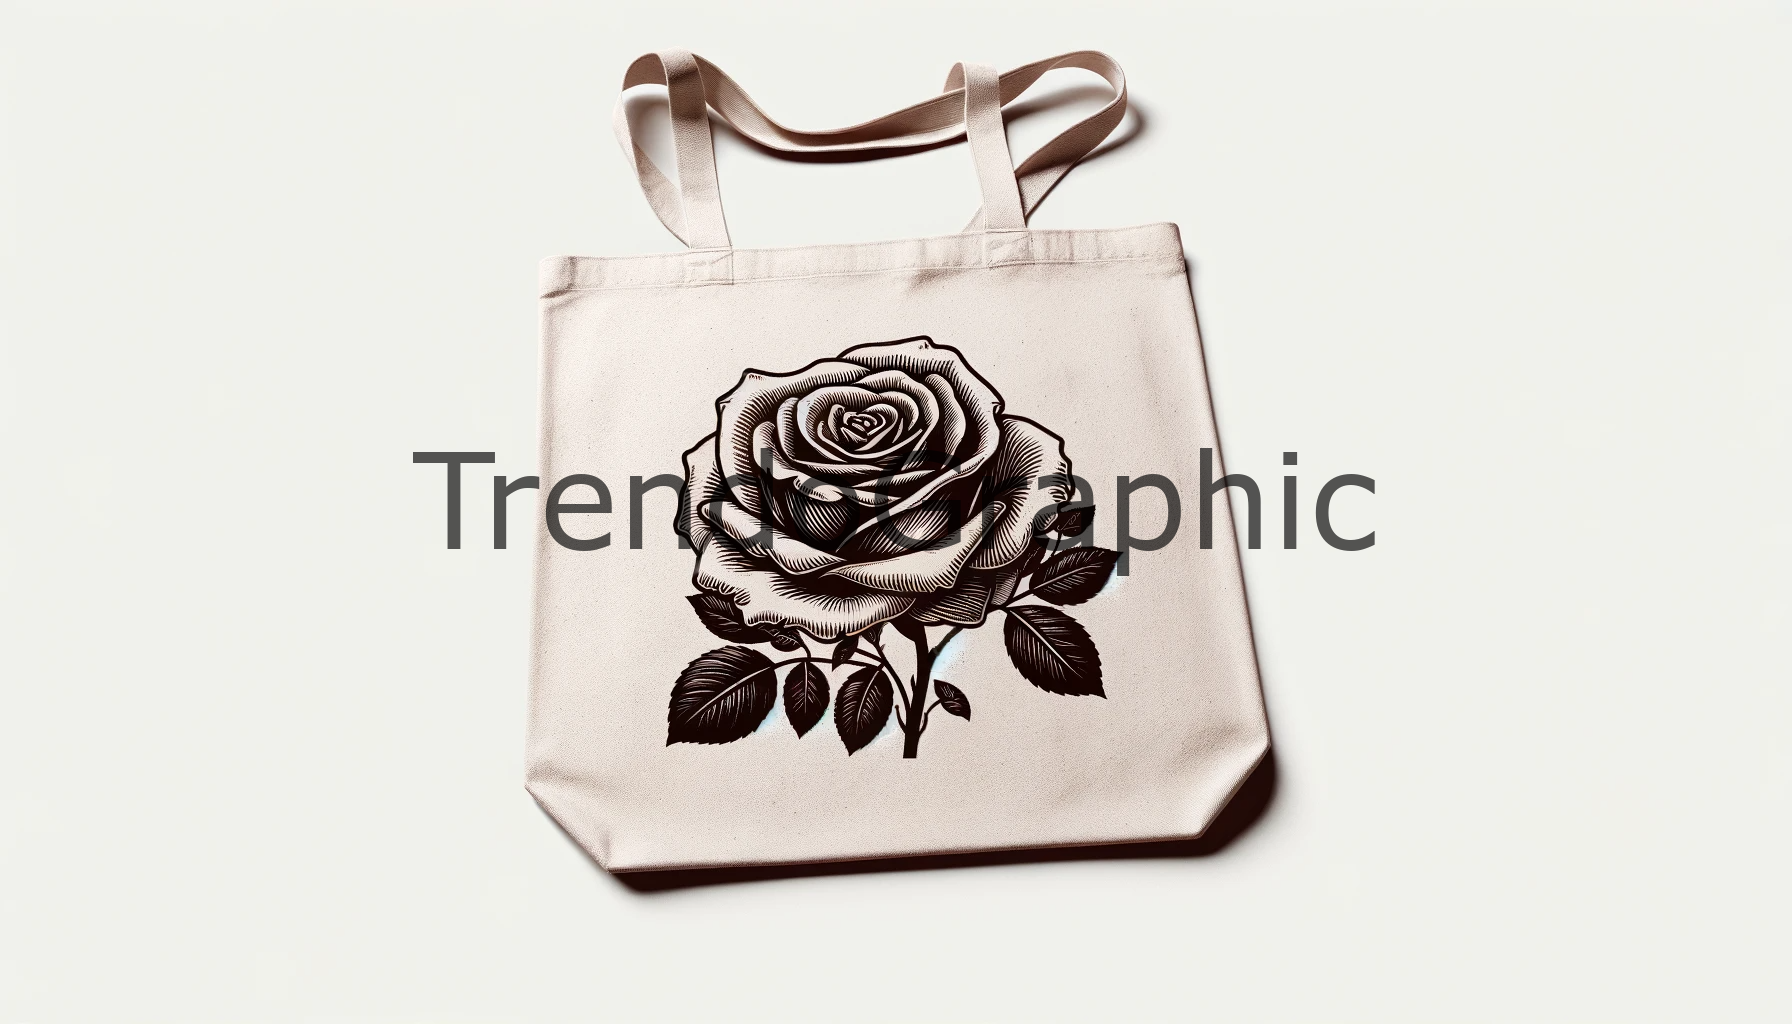 Stylish Rose-Print Canvas Tote Bag: A Touch of Elegance